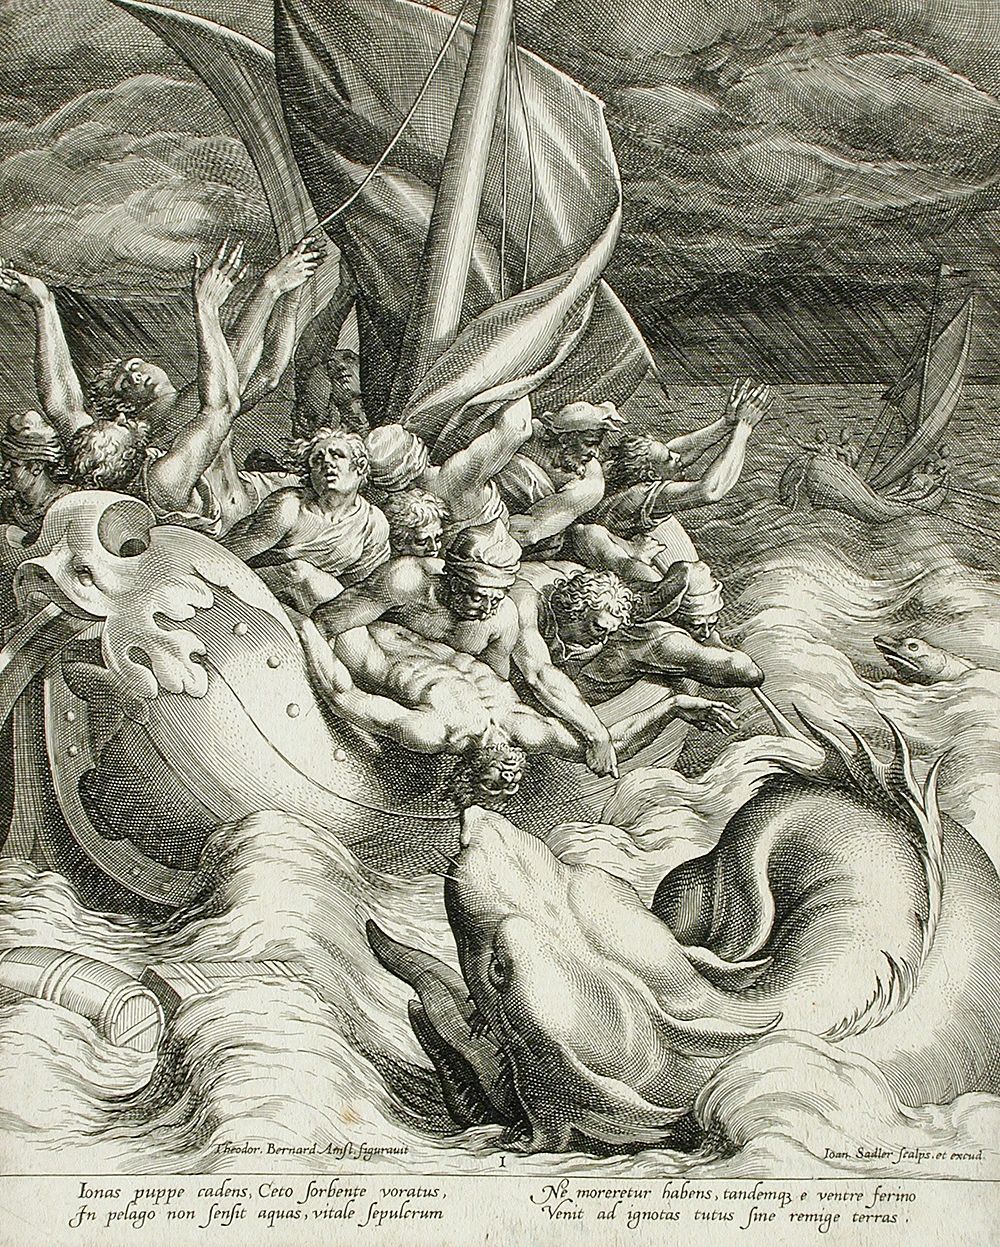 Jonah Thrown to the Whale by Johannes Sadeler I